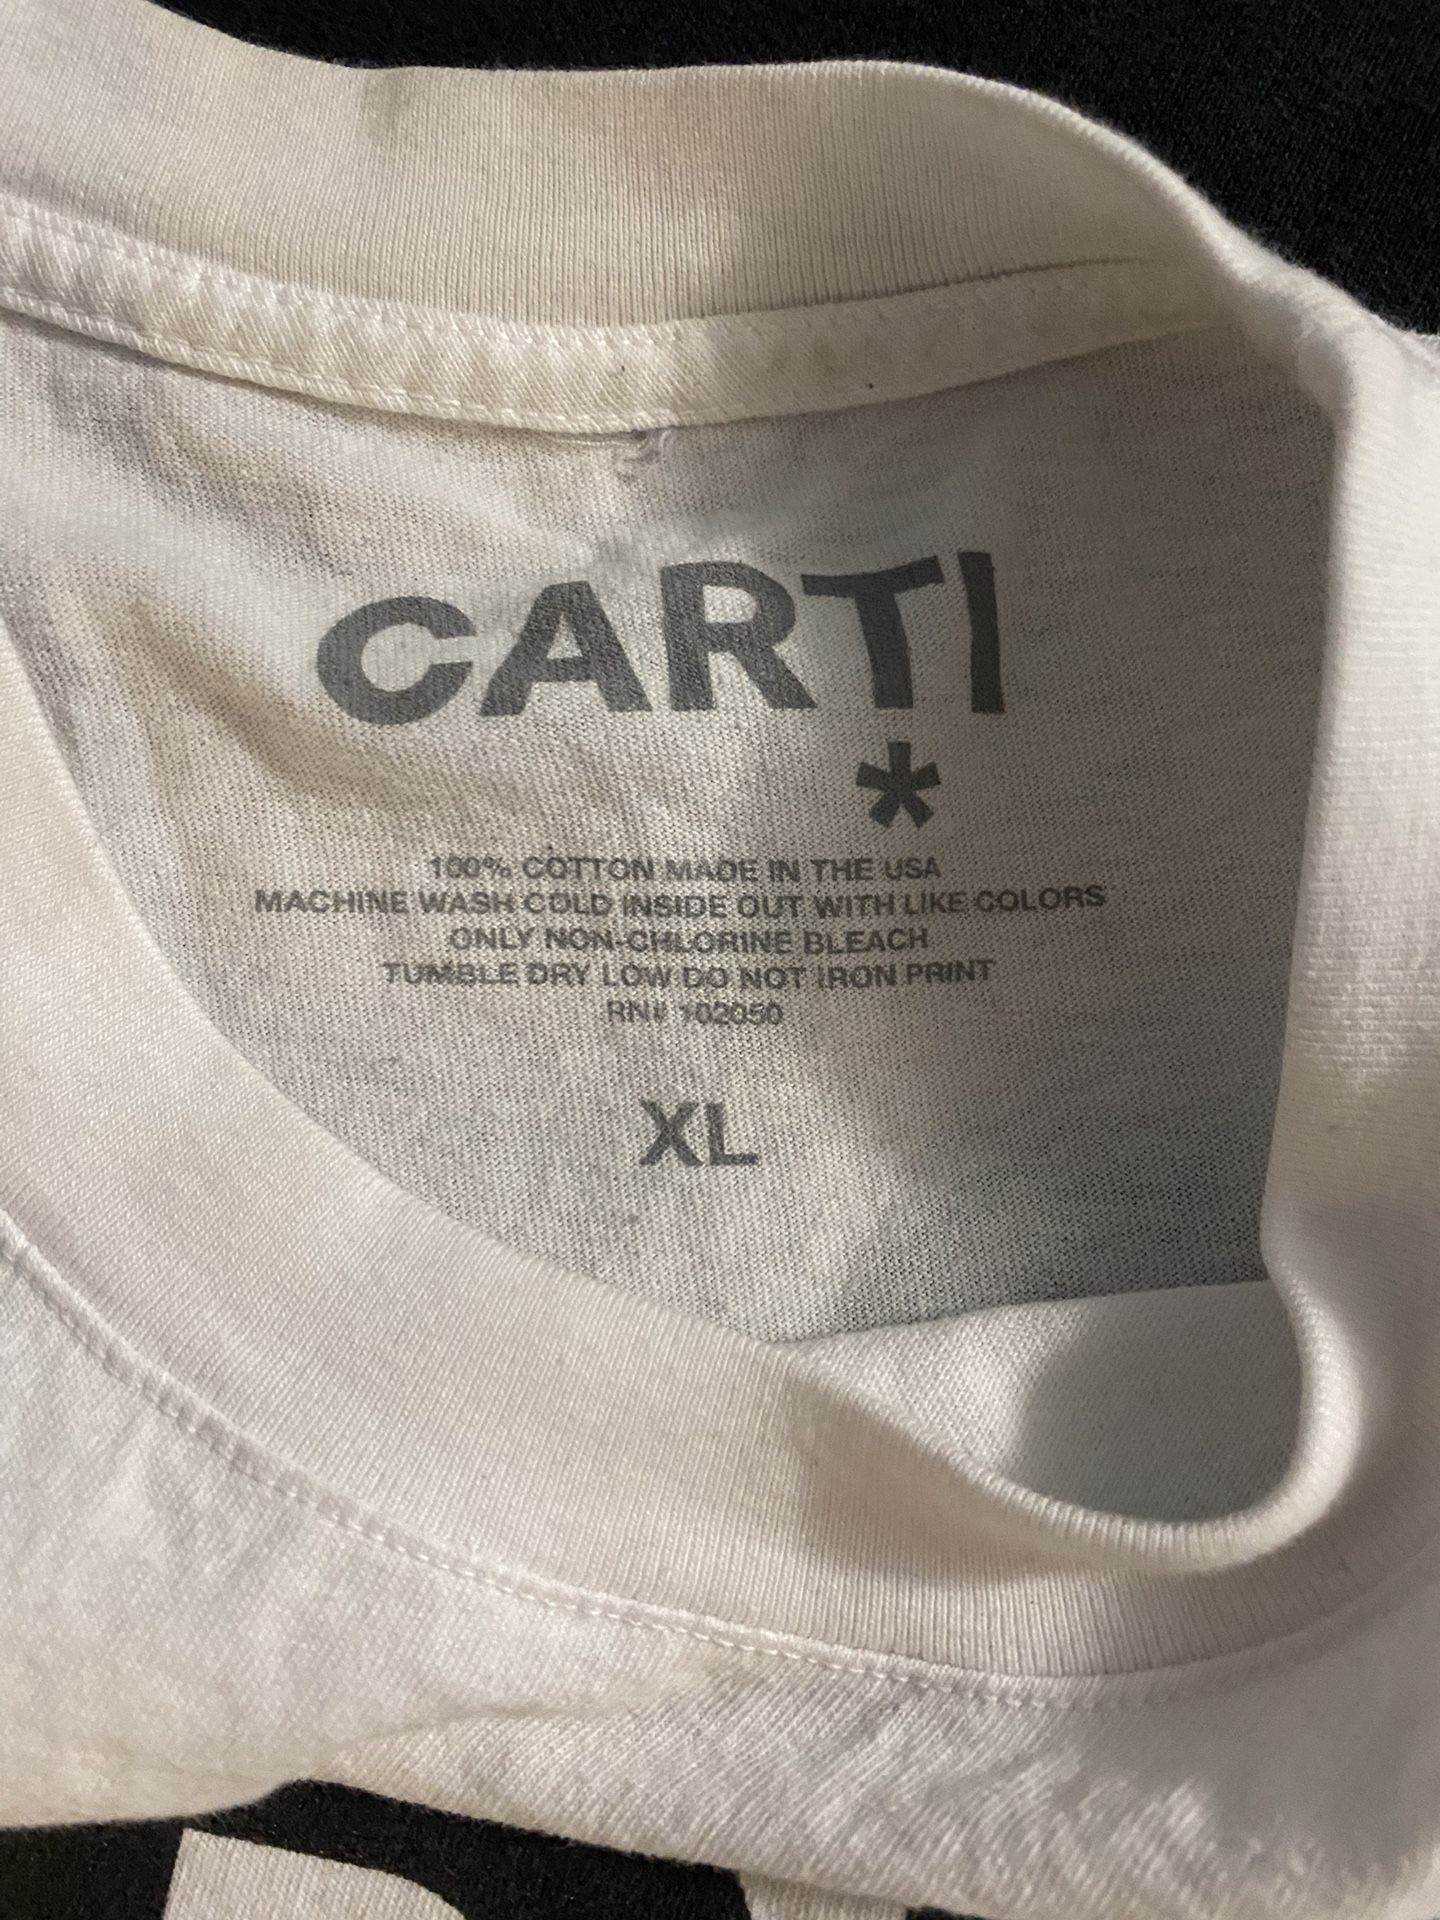 Playboi Carti Rockstar Made Concert T-shirt for Sale in West Hempstead, NY  - OfferUp